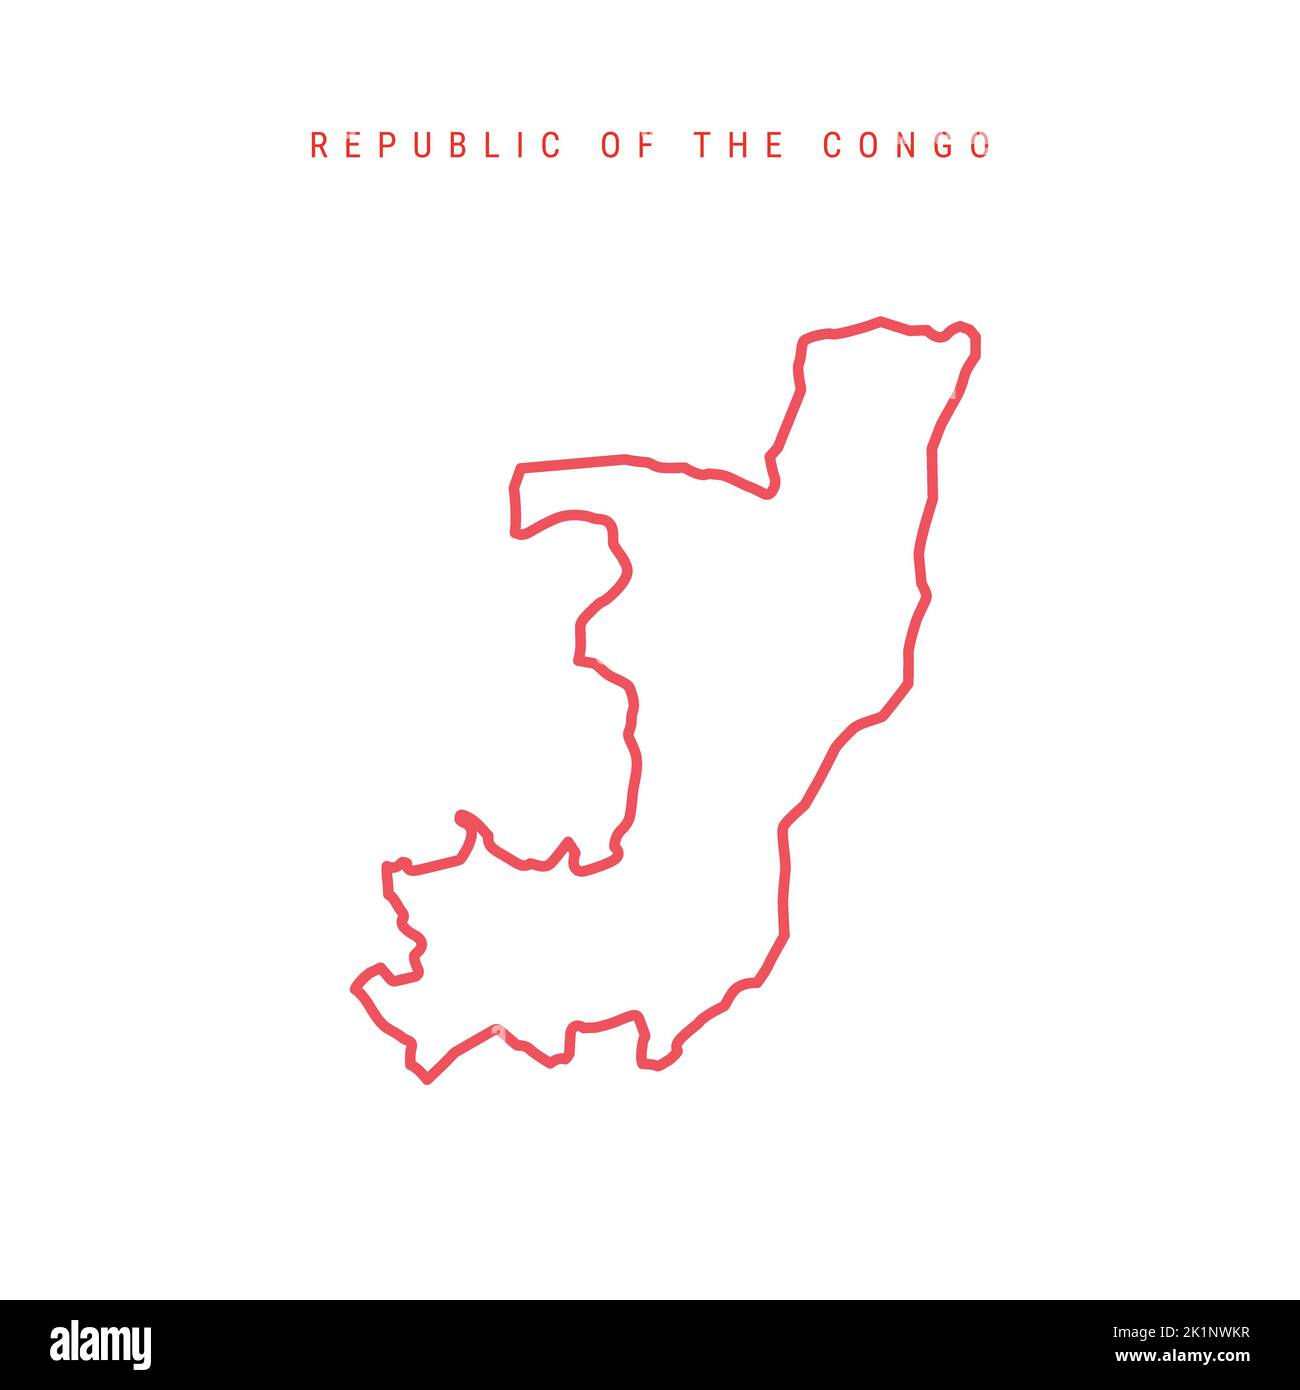 Republic of the Congo editable outline map. Congolese red border. Country name. Adjust line weight. Change to any color. Vector illustration. Stock Vector